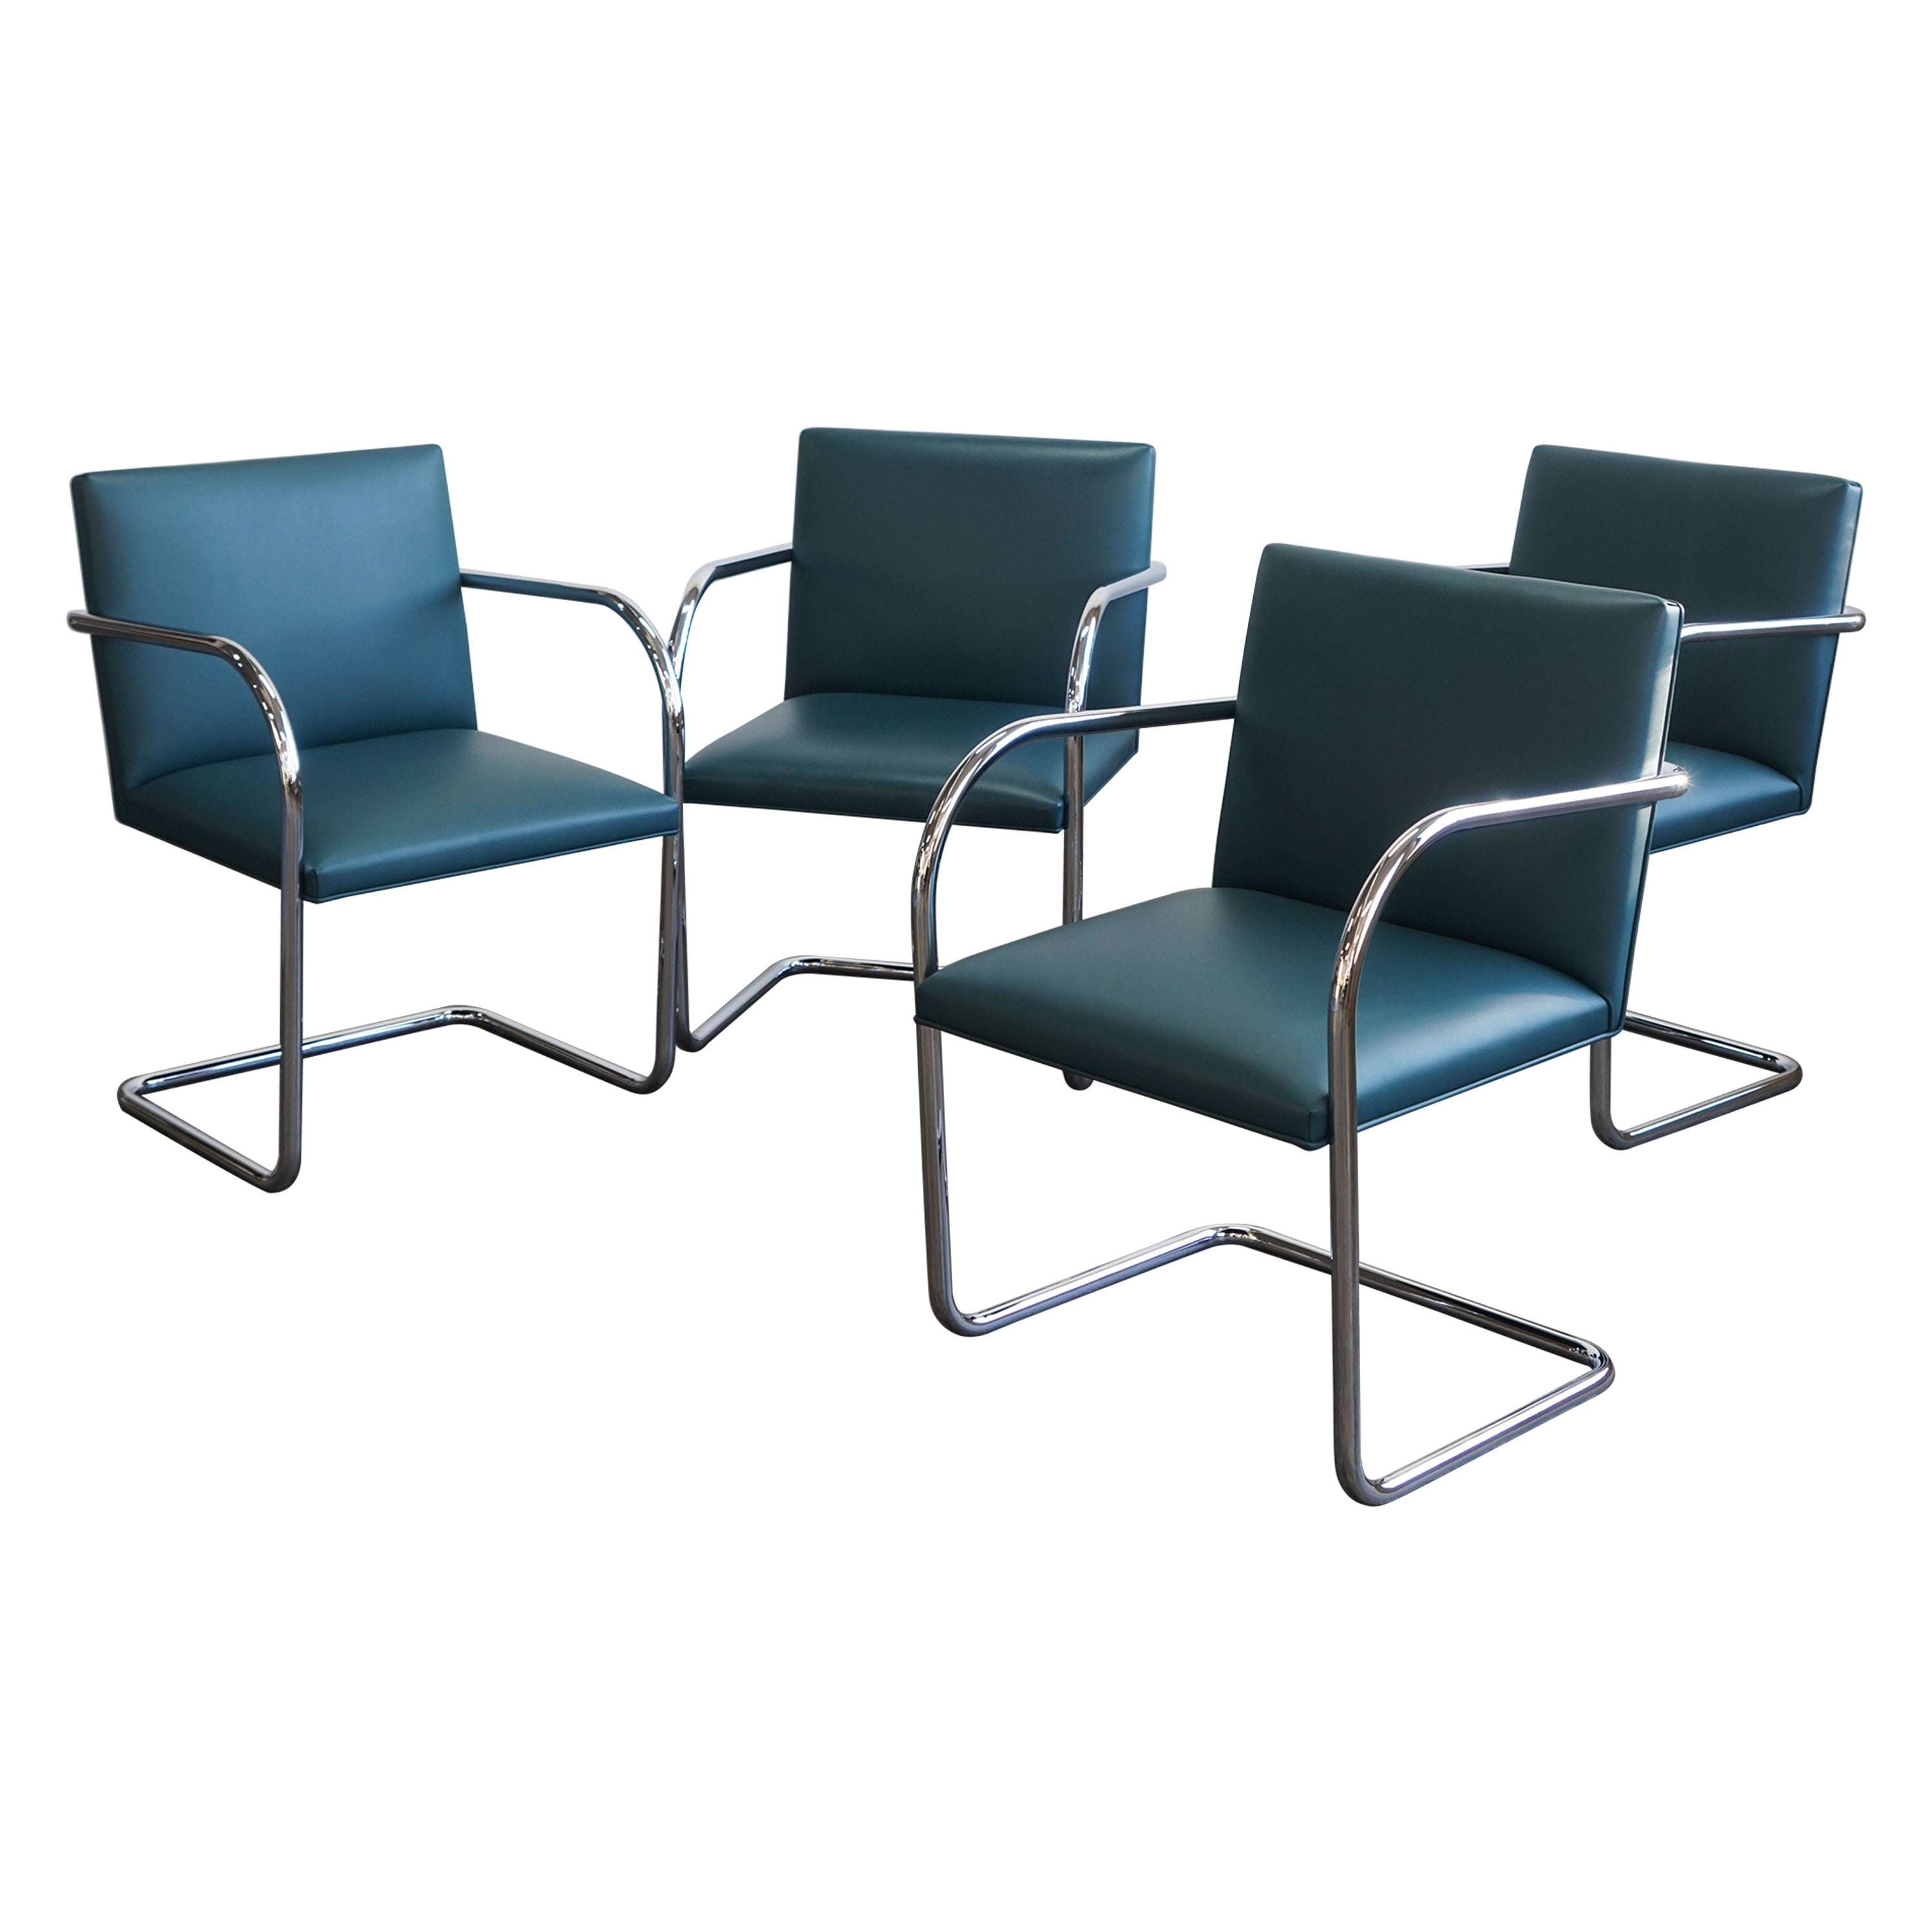 Four Mies van der Rohe Knoll BRNO tubular armchairs in teal leather For Sale